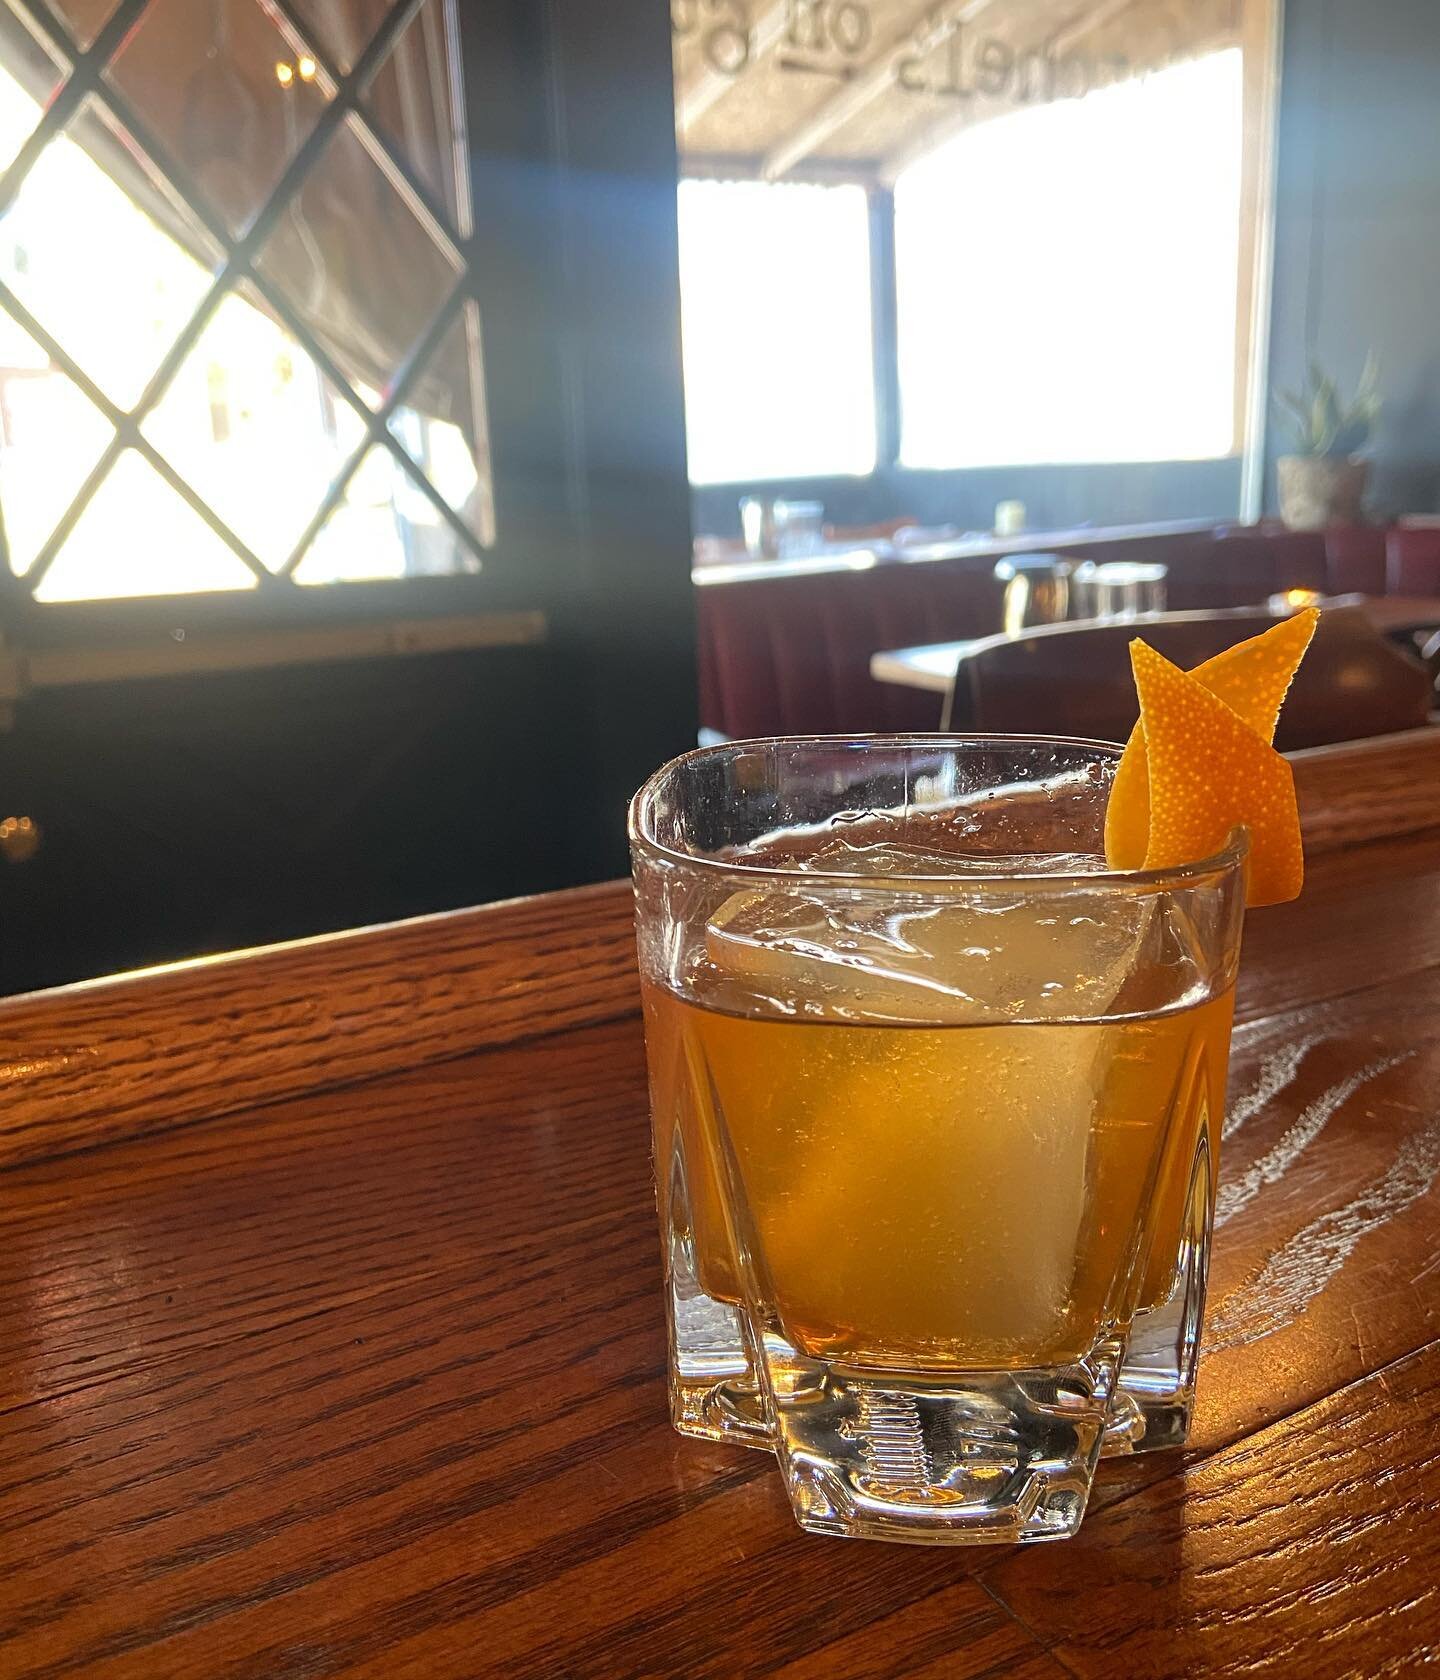 Spirit forward drinks still have a place in the world when it&rsquo;s hot out! This bourbon spirit forward drink is great for spring evenings!
⚫️
2oz Bourbon
0.5oz Fino Sherry
0.25oz St. Germain 
0.25oz @mile.high.mixology Orange/Clove Syrup 
3 dash 